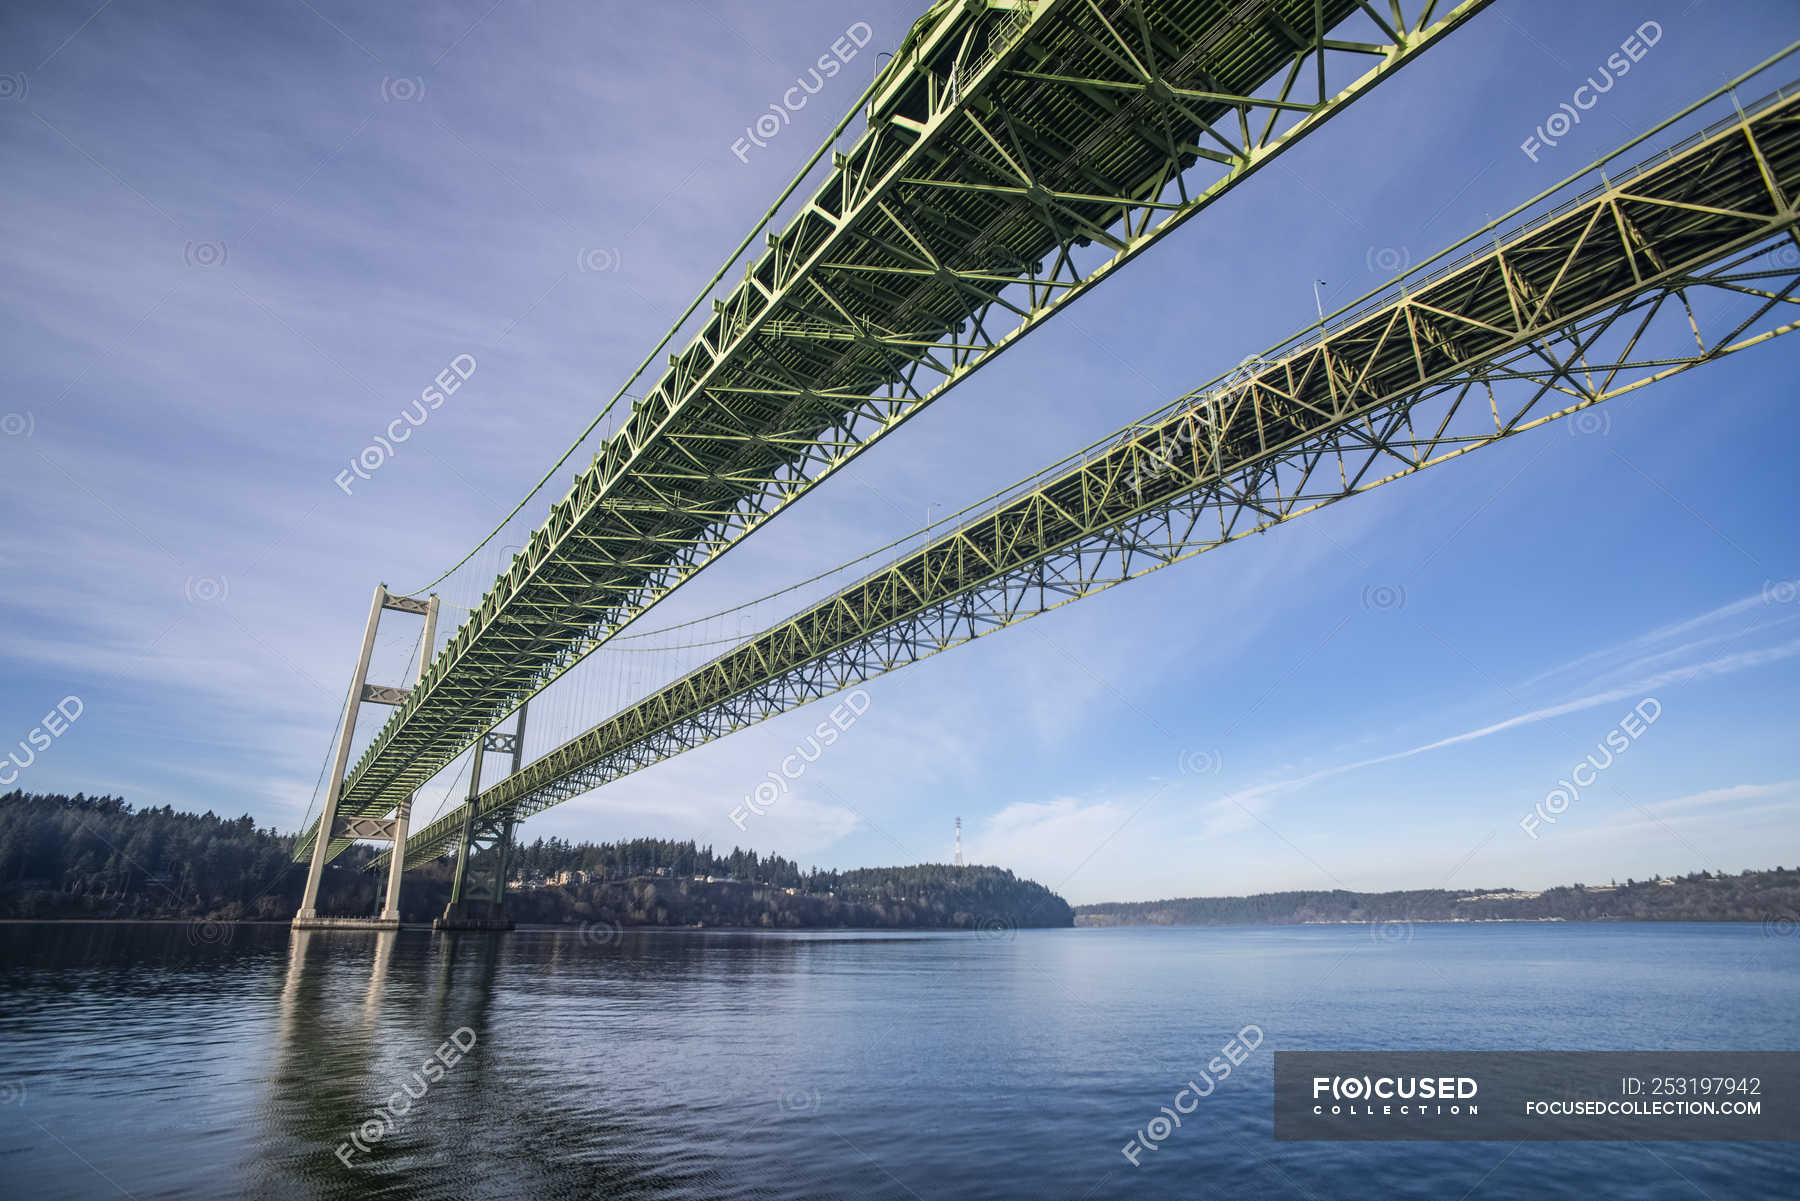 The Narrows Bridge from the water surface, Olympic Peninsula